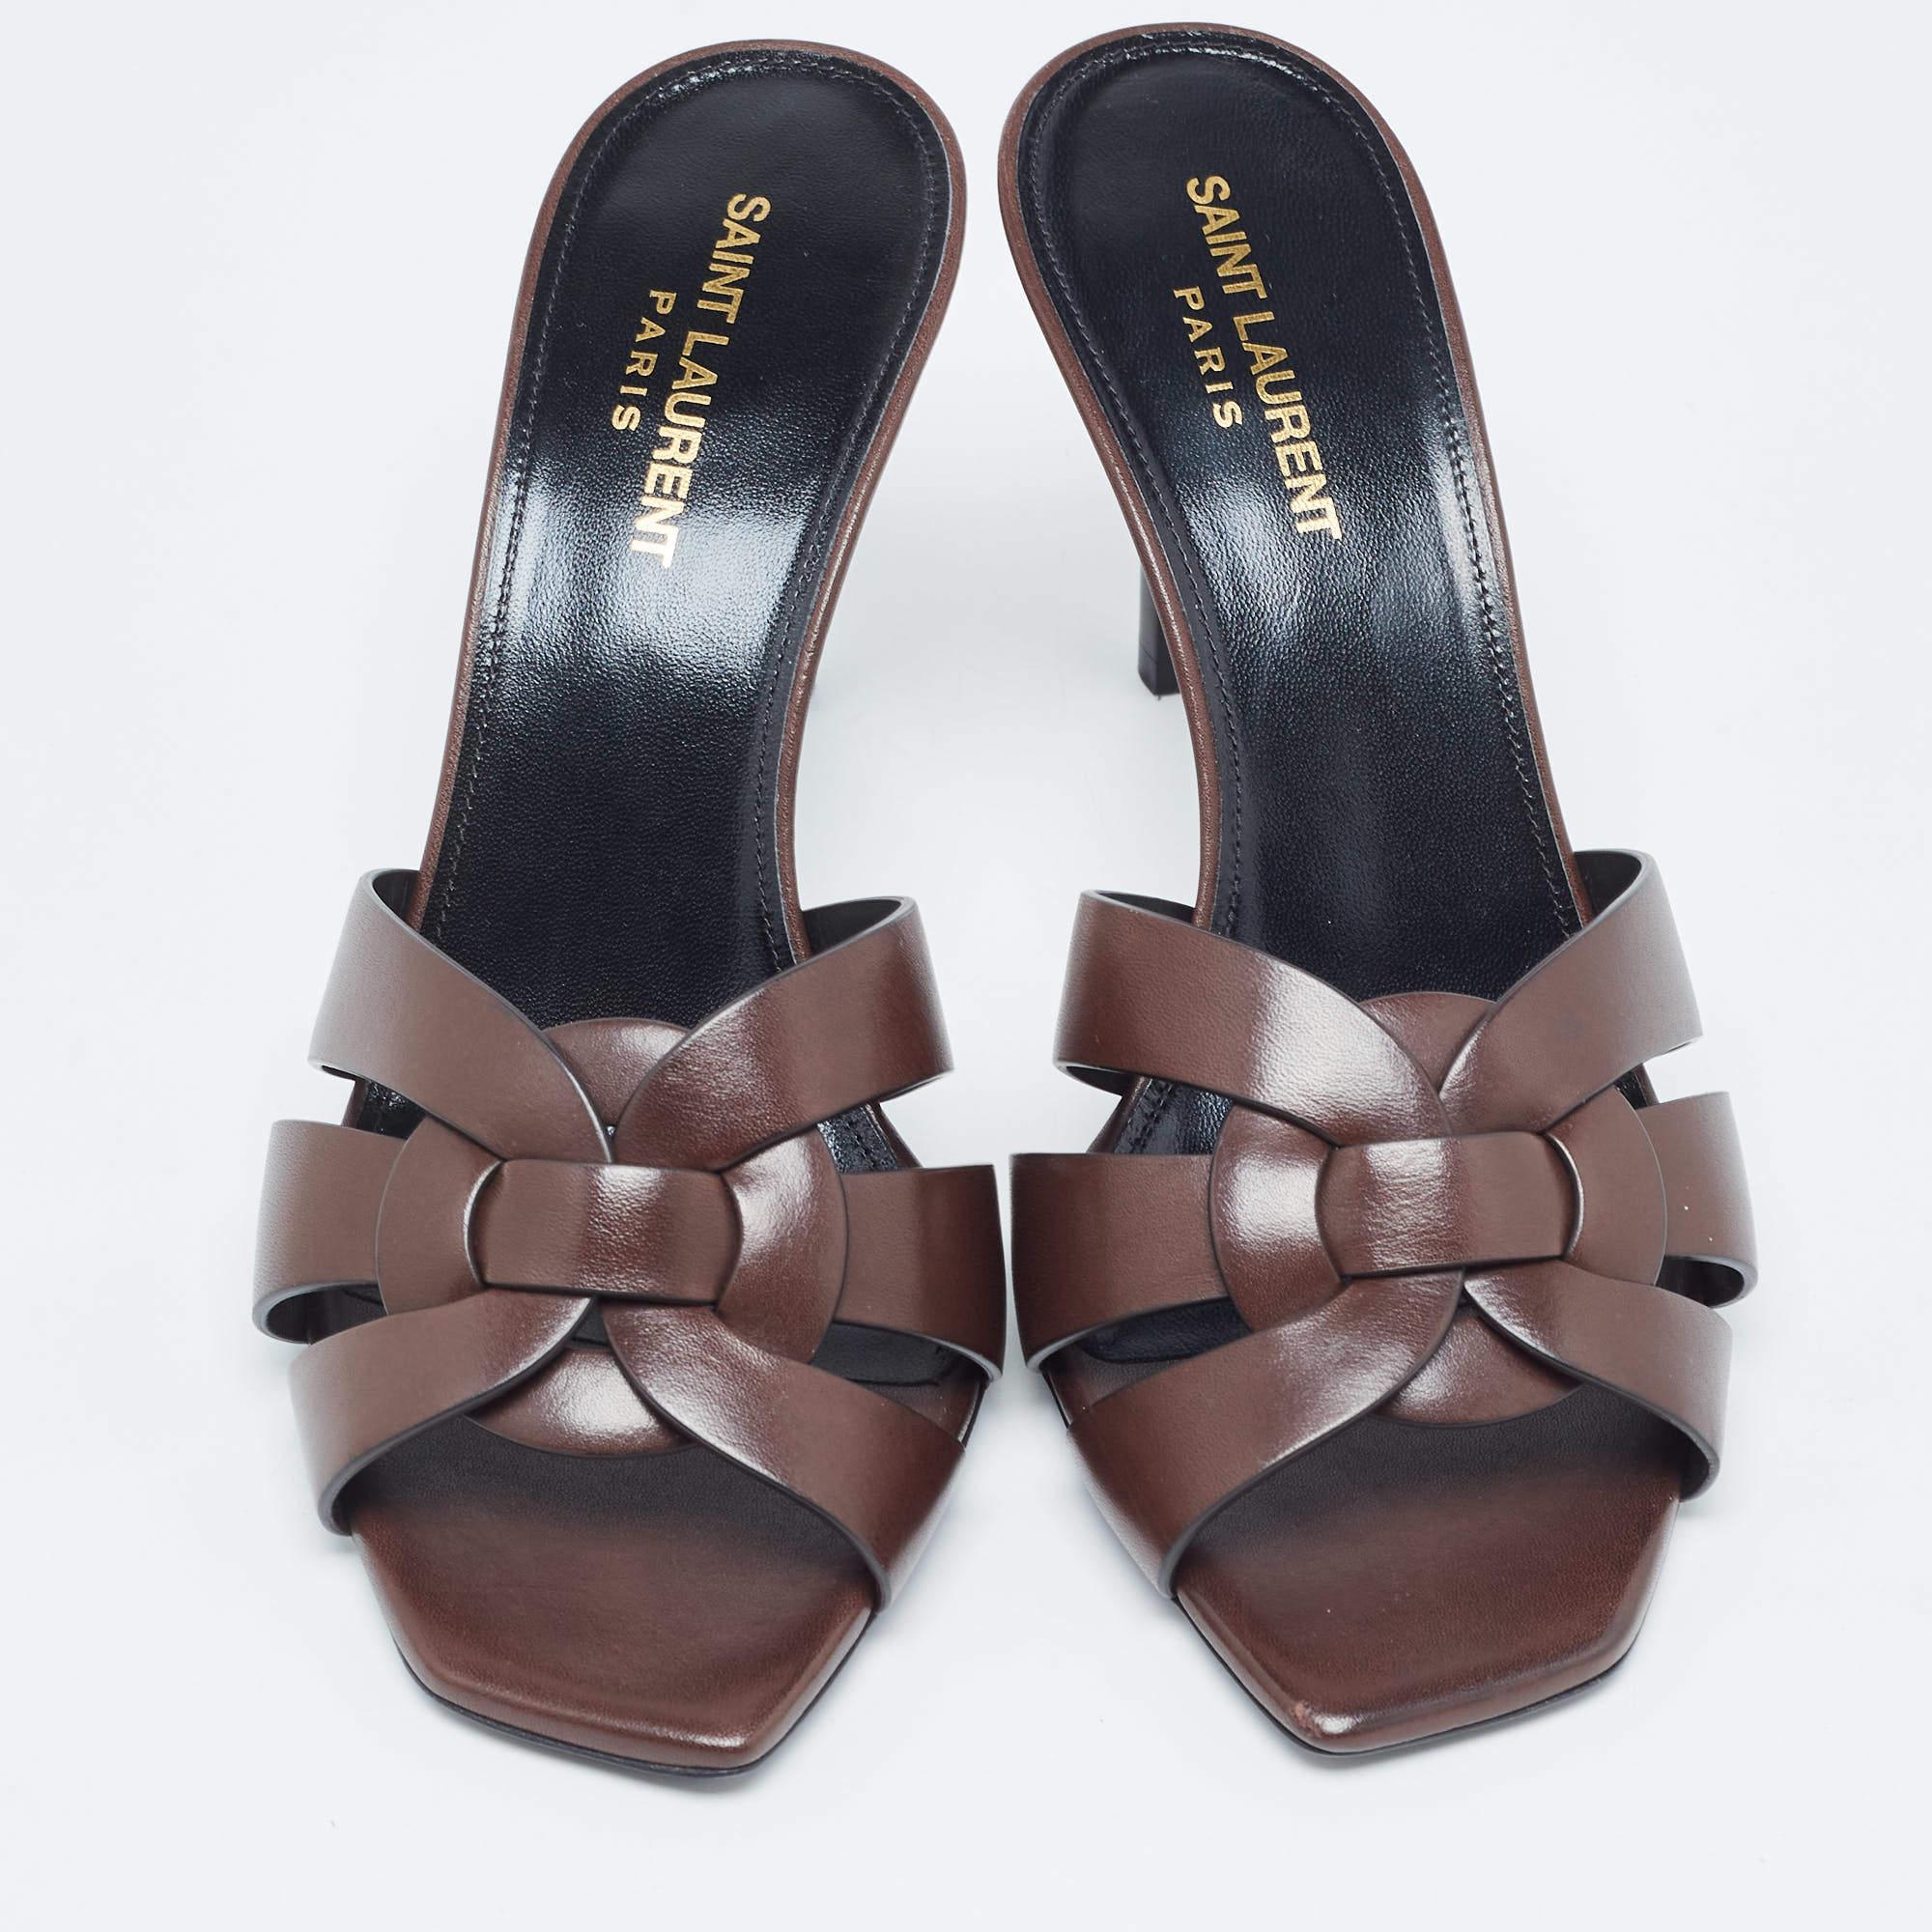 Upgrade your look by adding these designer sandals to your lovely wardrobe. They are crafted skilfully to grant the perfect fit and style.

Includes: Info Booklet, Original Box, Extra Heel Tips

